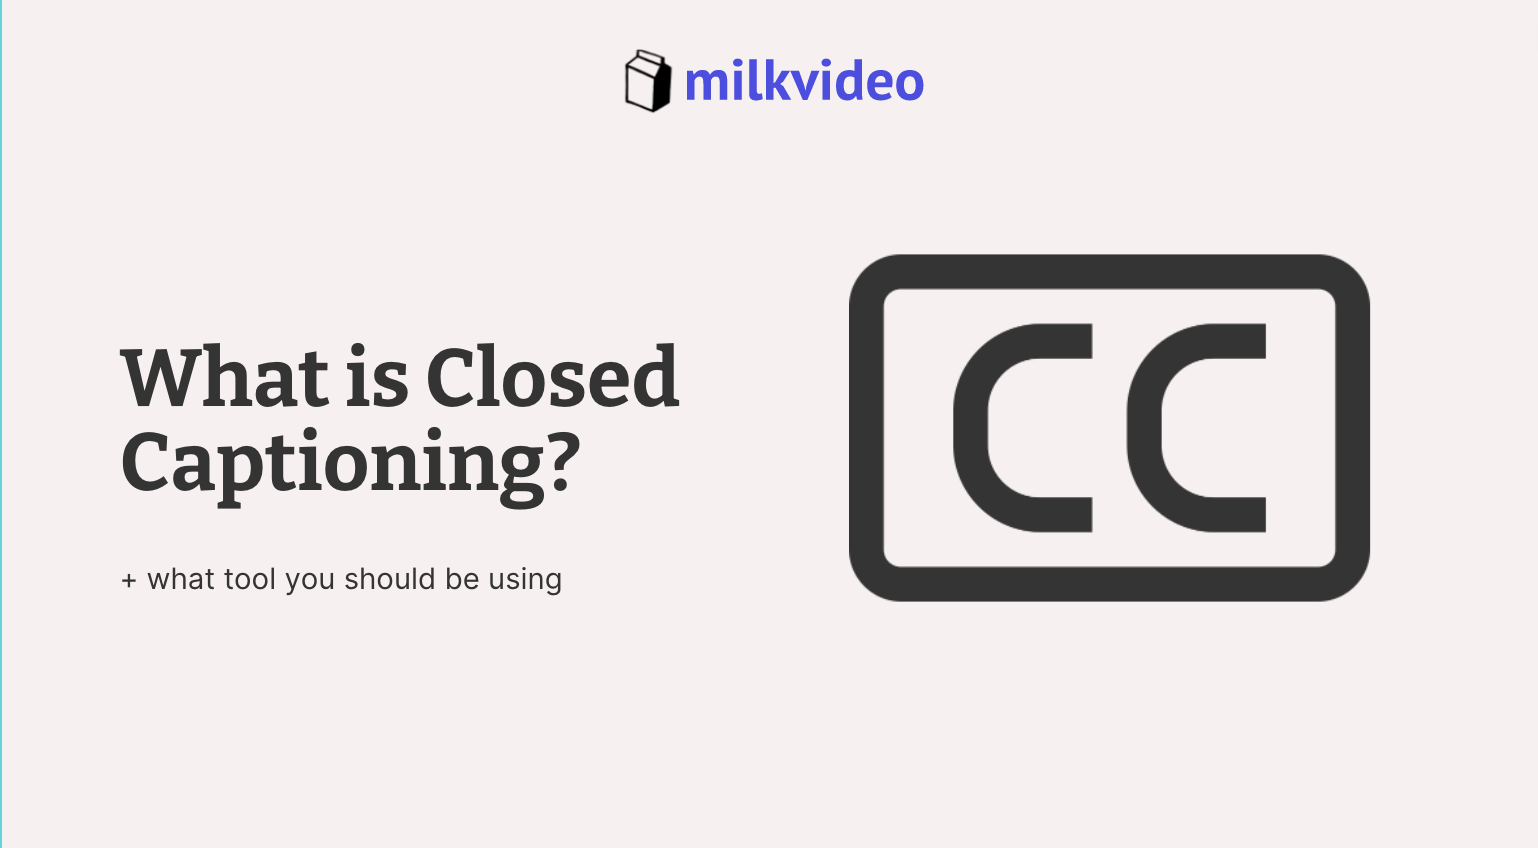 What is Closed Captioning?